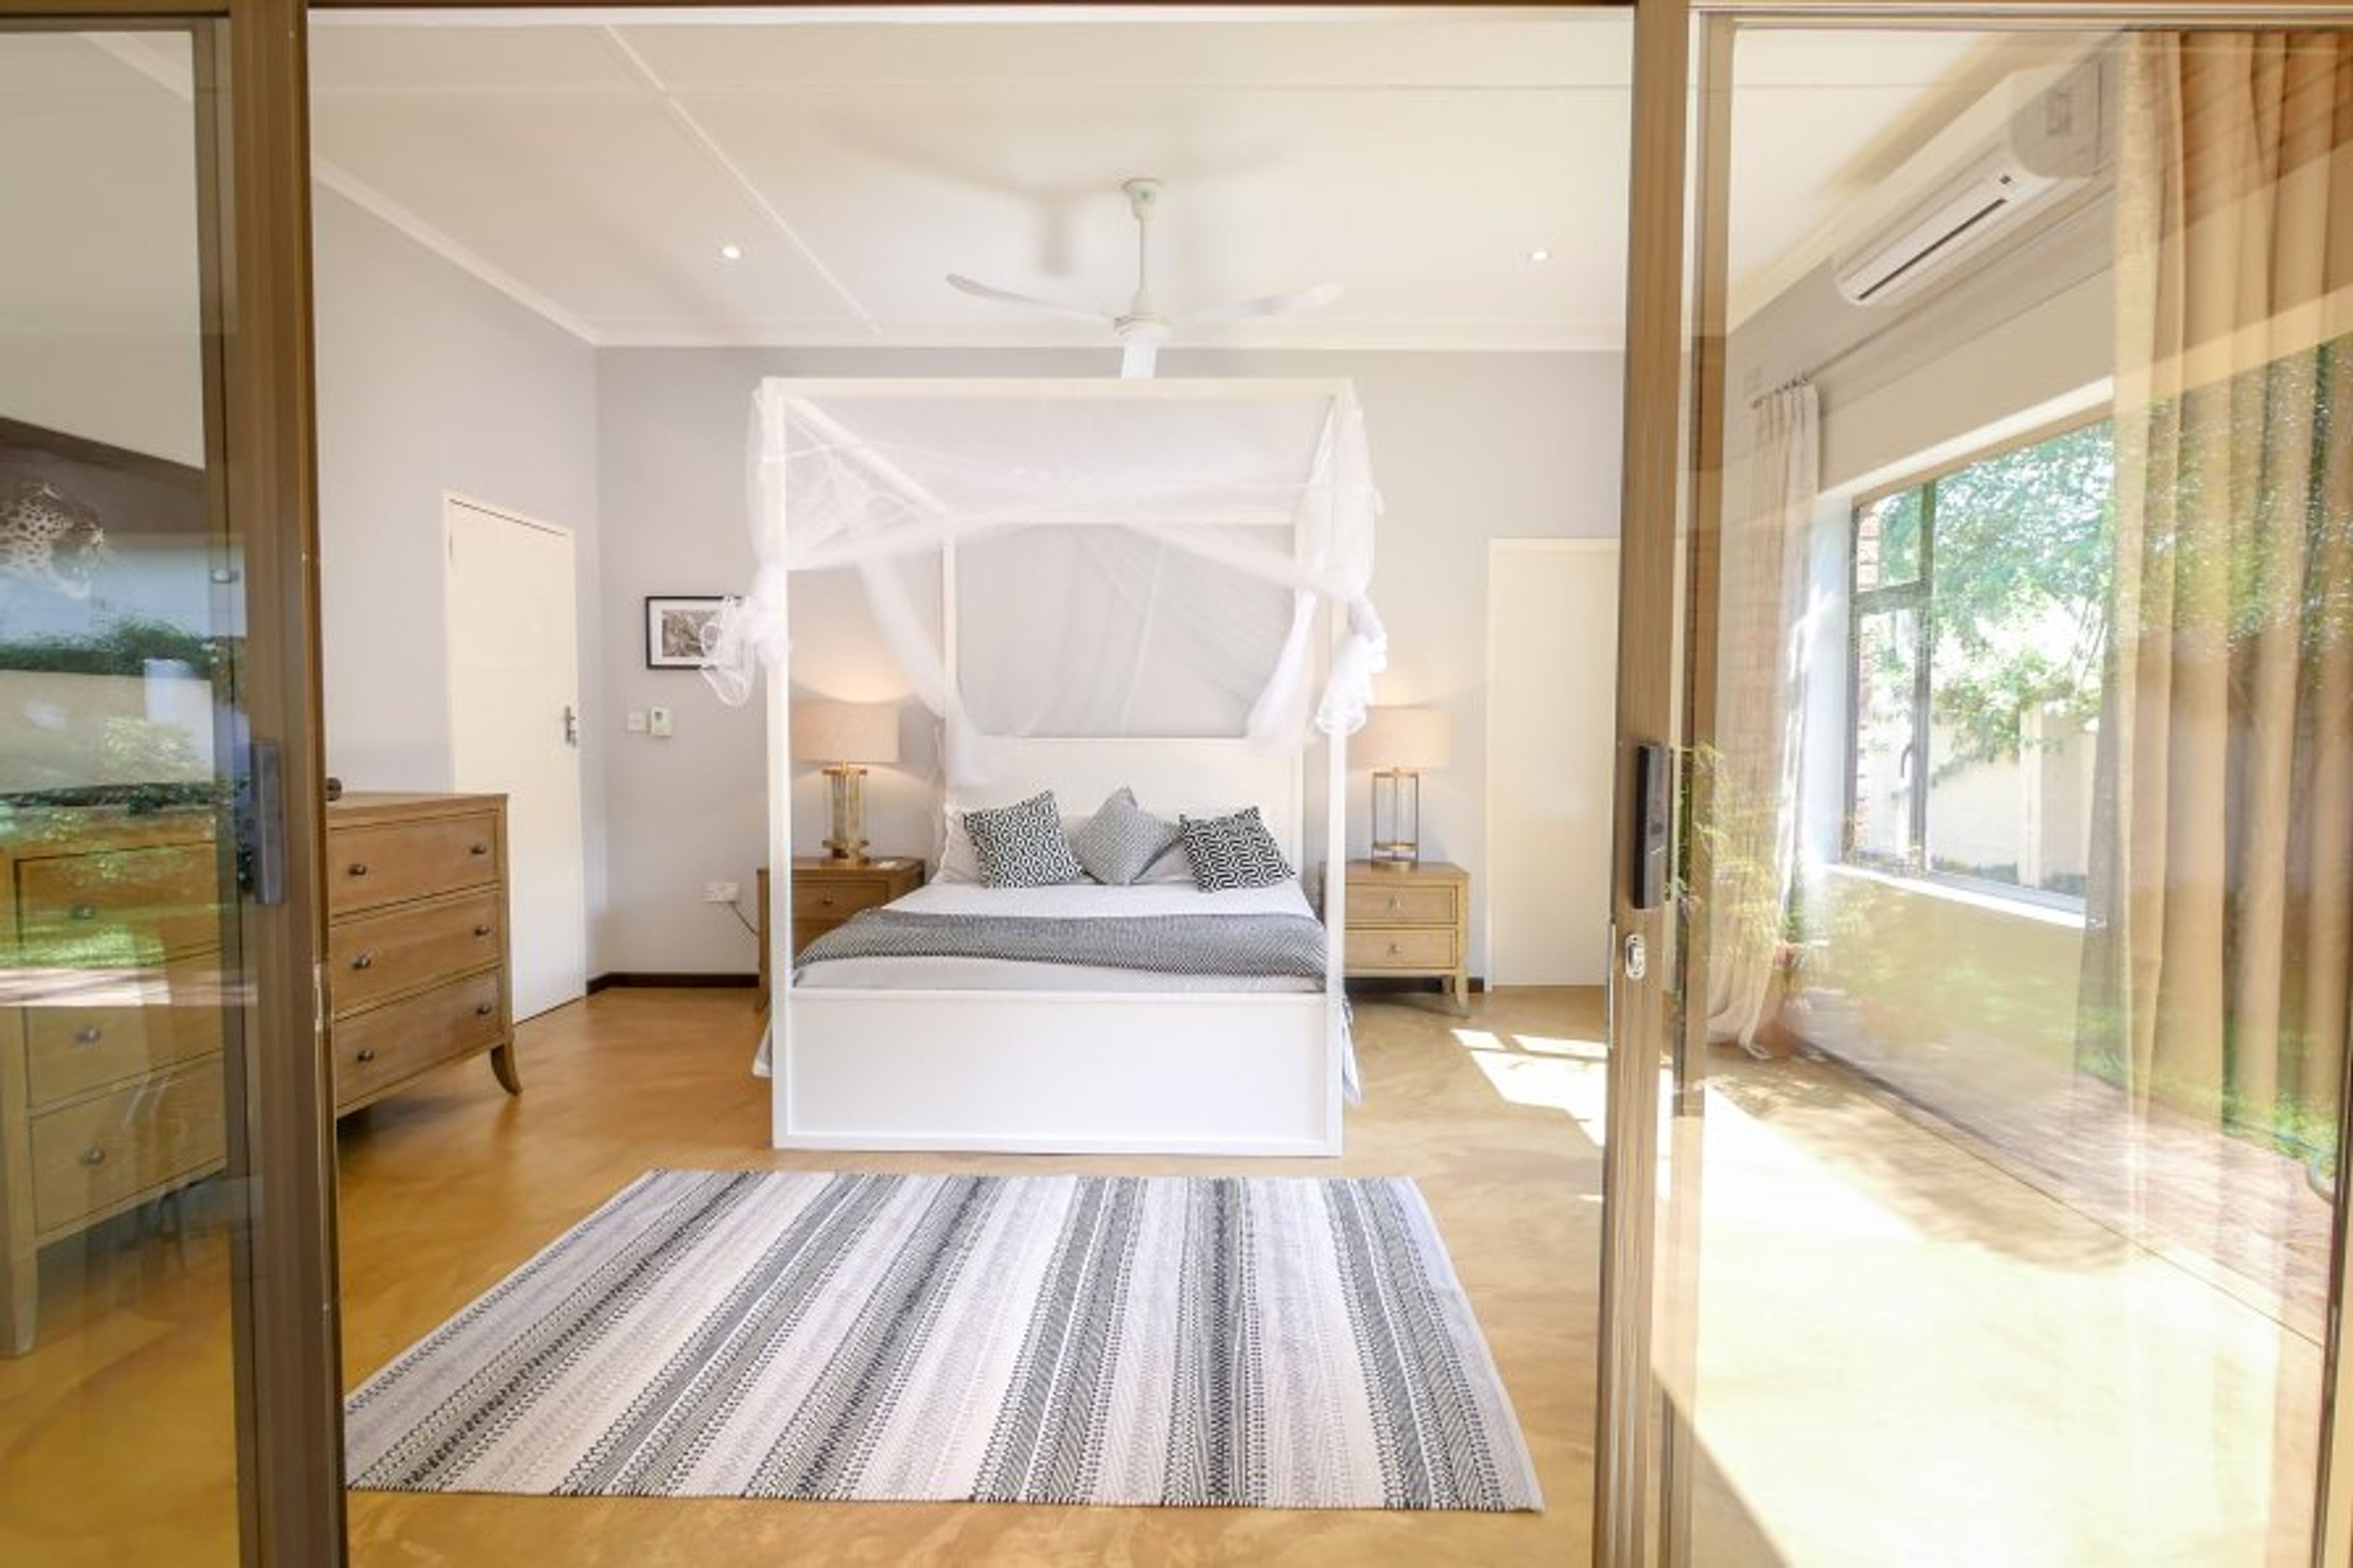 King size bedroom with ensuite and air-conditioning